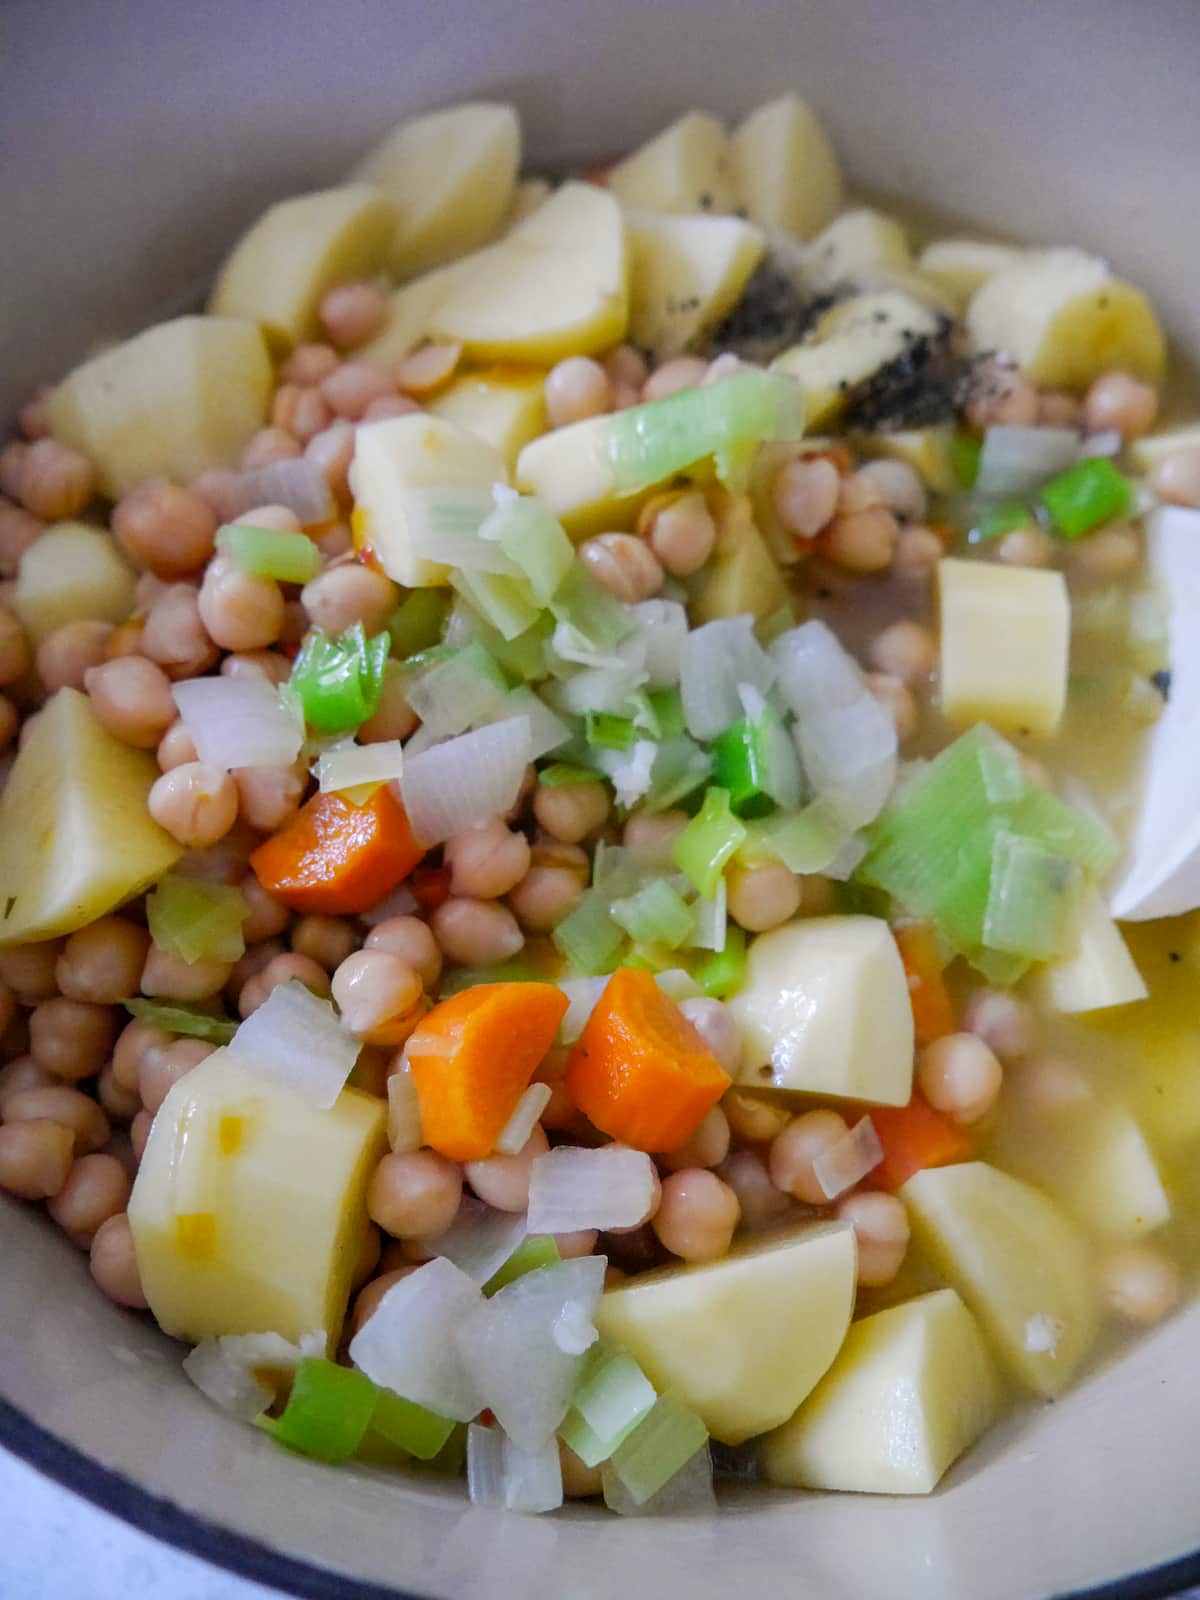 A large pan filled with sauteed vegetables, with chickpeas, potatoes and added black pepper and vegetable stock.